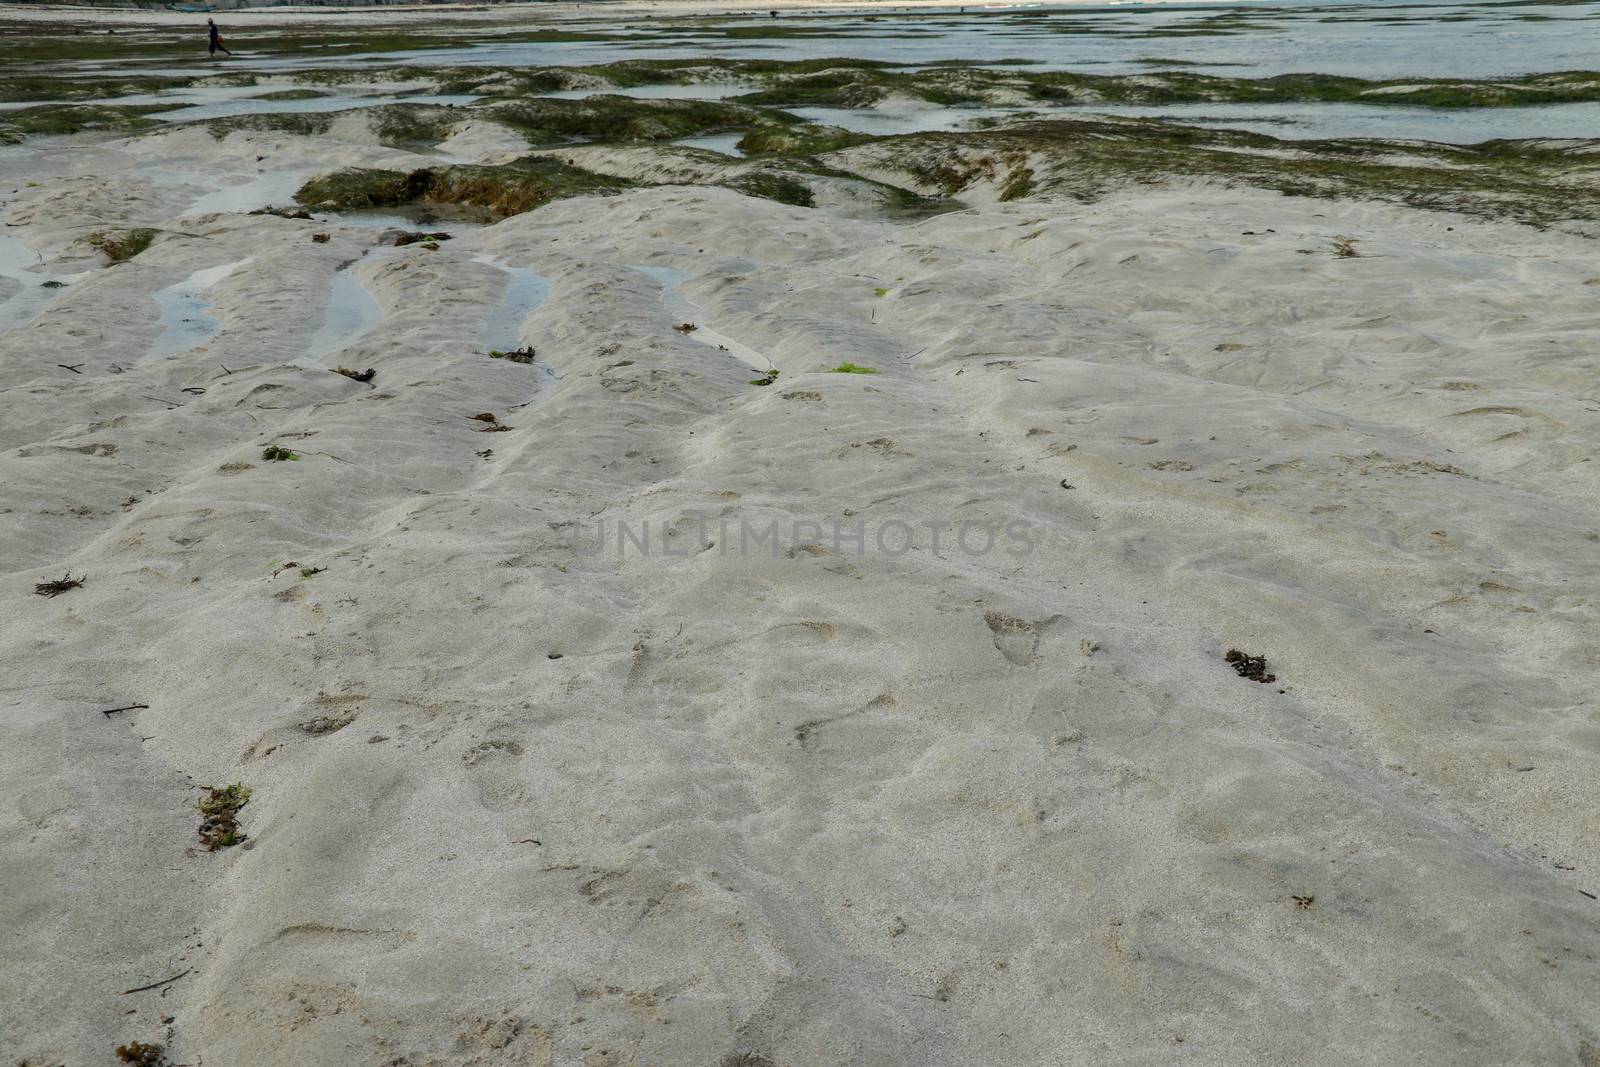 Patterns made by tide pools of water at low tide on Tanjung Aan beach, Lombok, Indonesia.